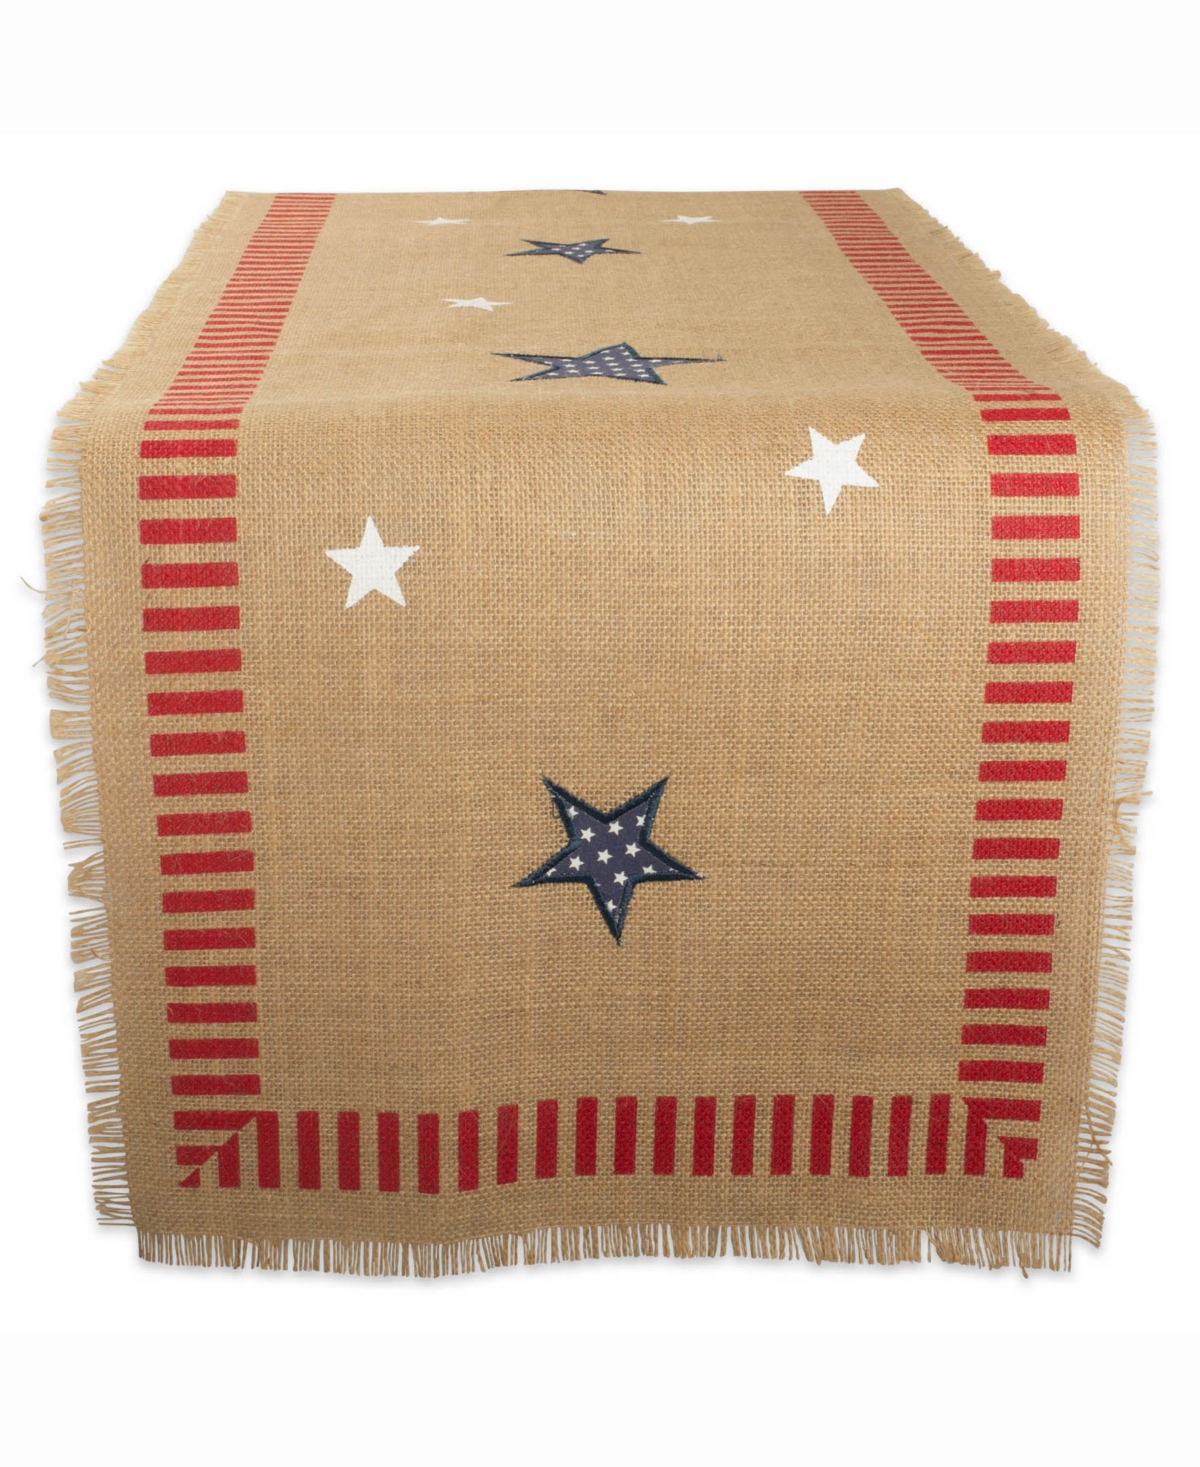 Design Imports 4th Of July Jute Table Runner 14" X 74" In Red